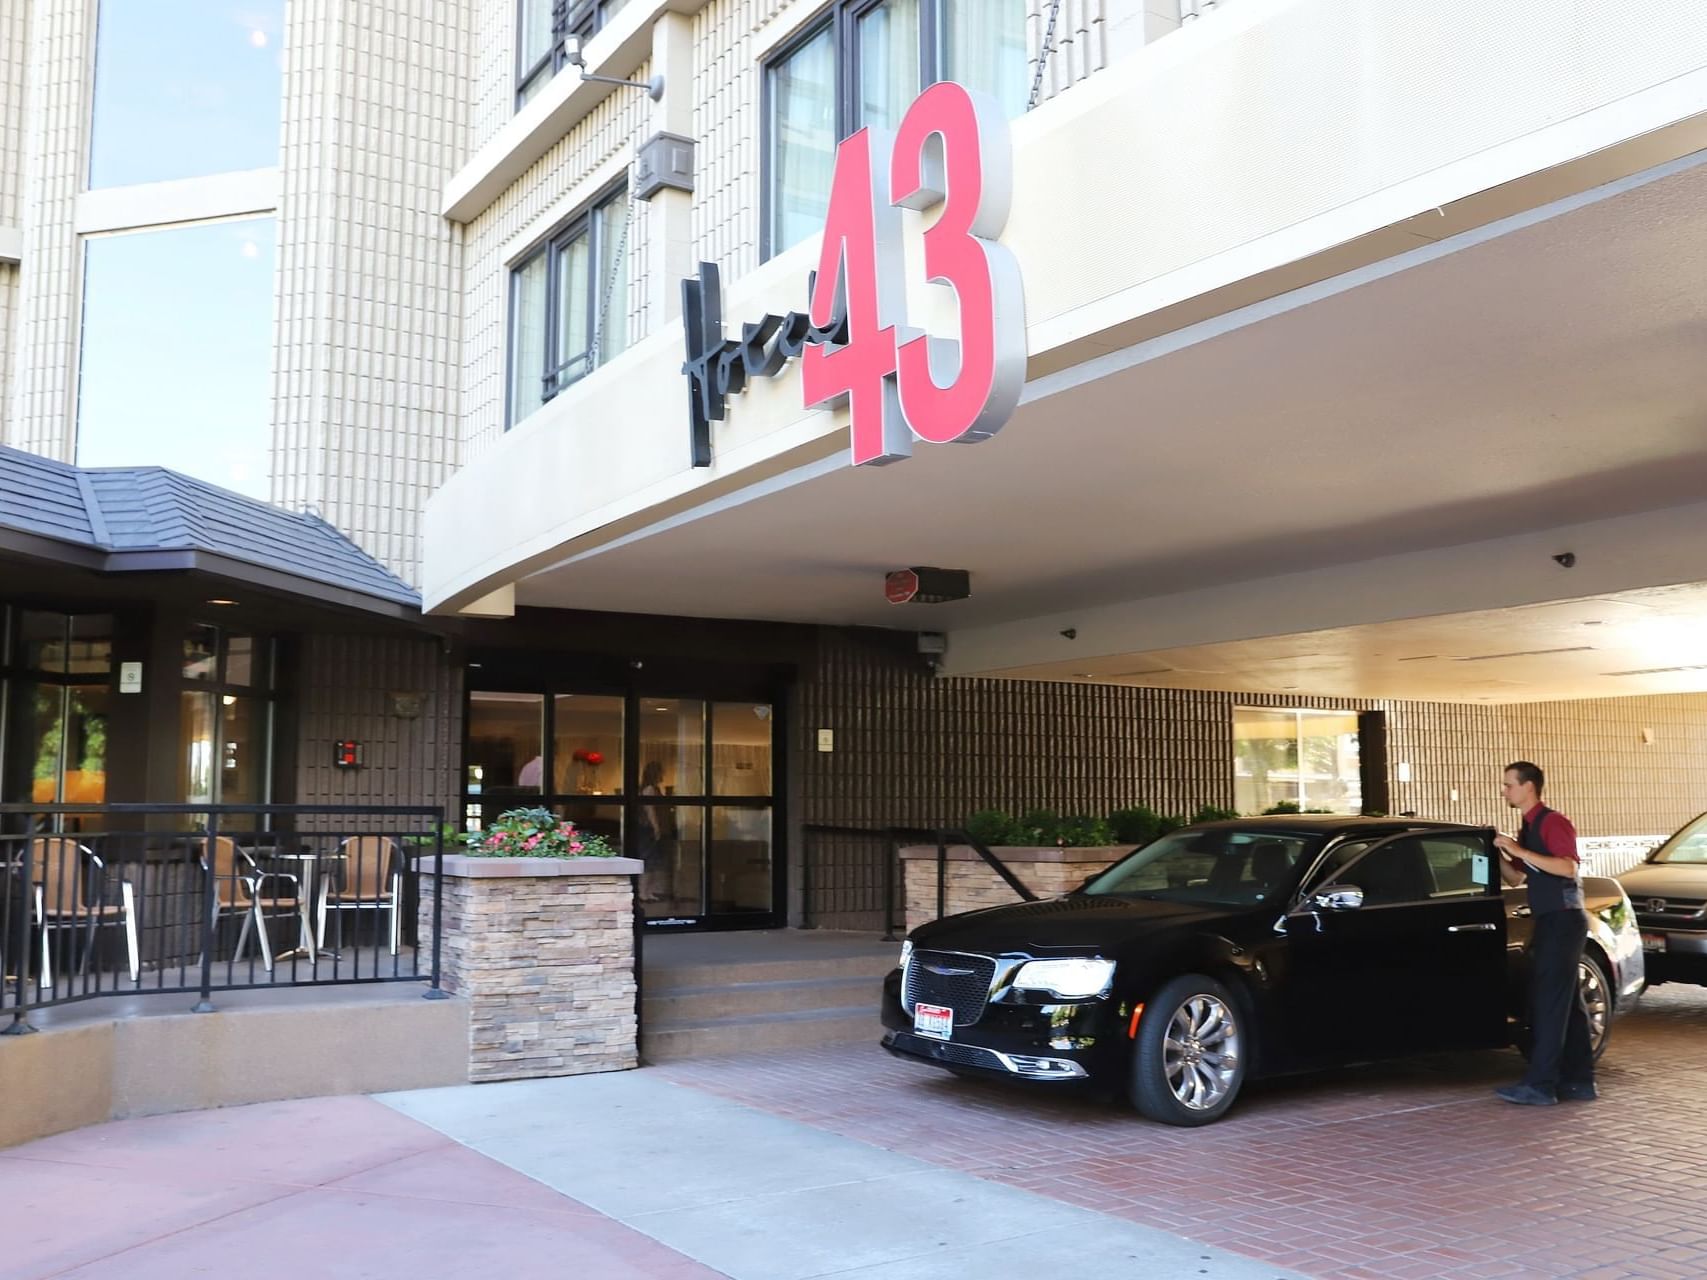 Exterior view with valet parking at Hotel 43